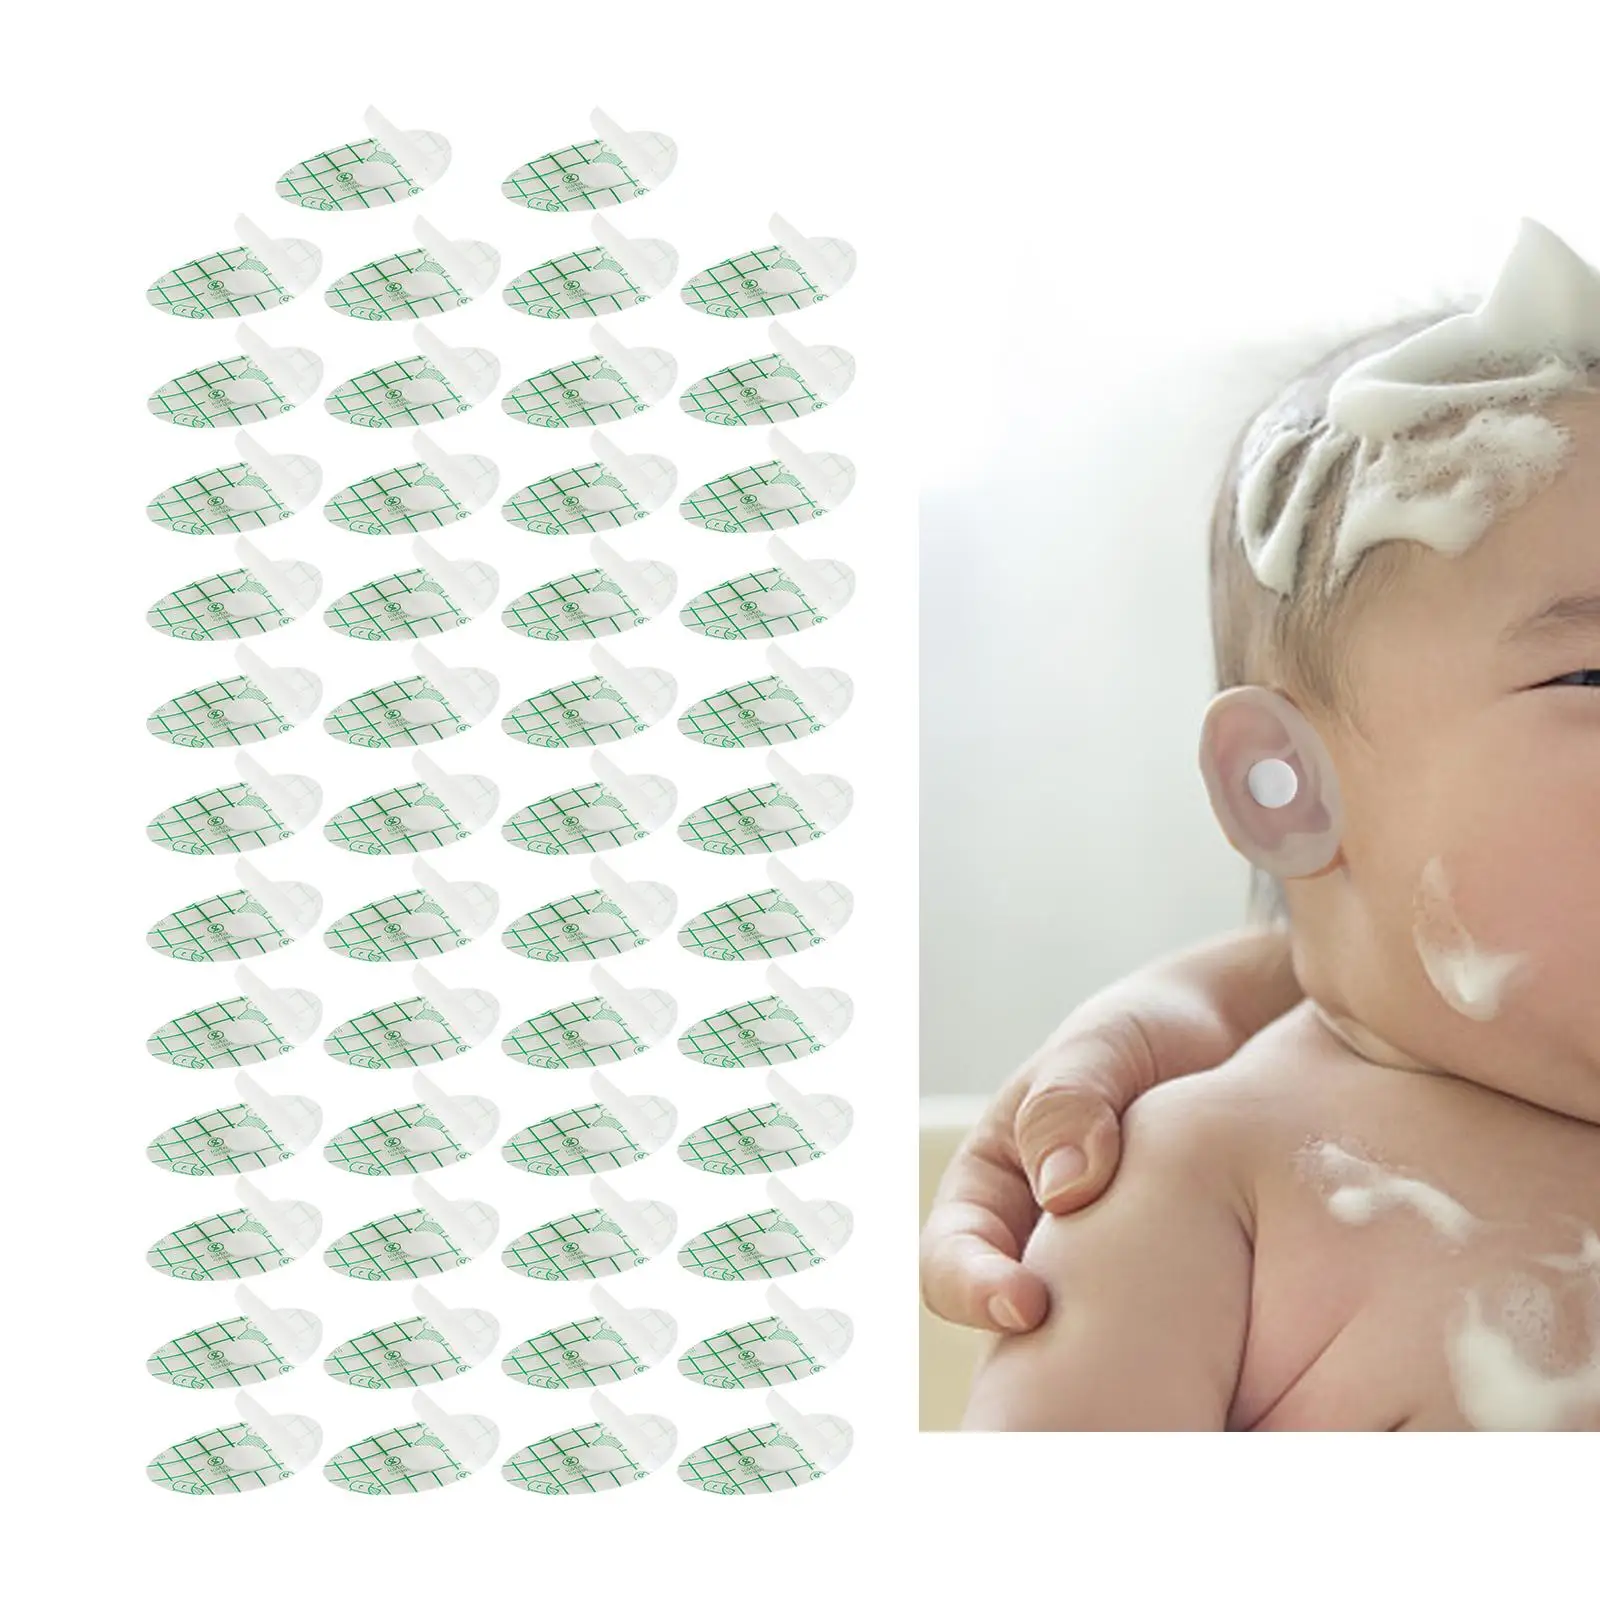 50x Portable Waterproof Baby Ear Stickers Soft Earmuffs Transparent Ears Protector Covers for Water Sports Bathing Children Kids